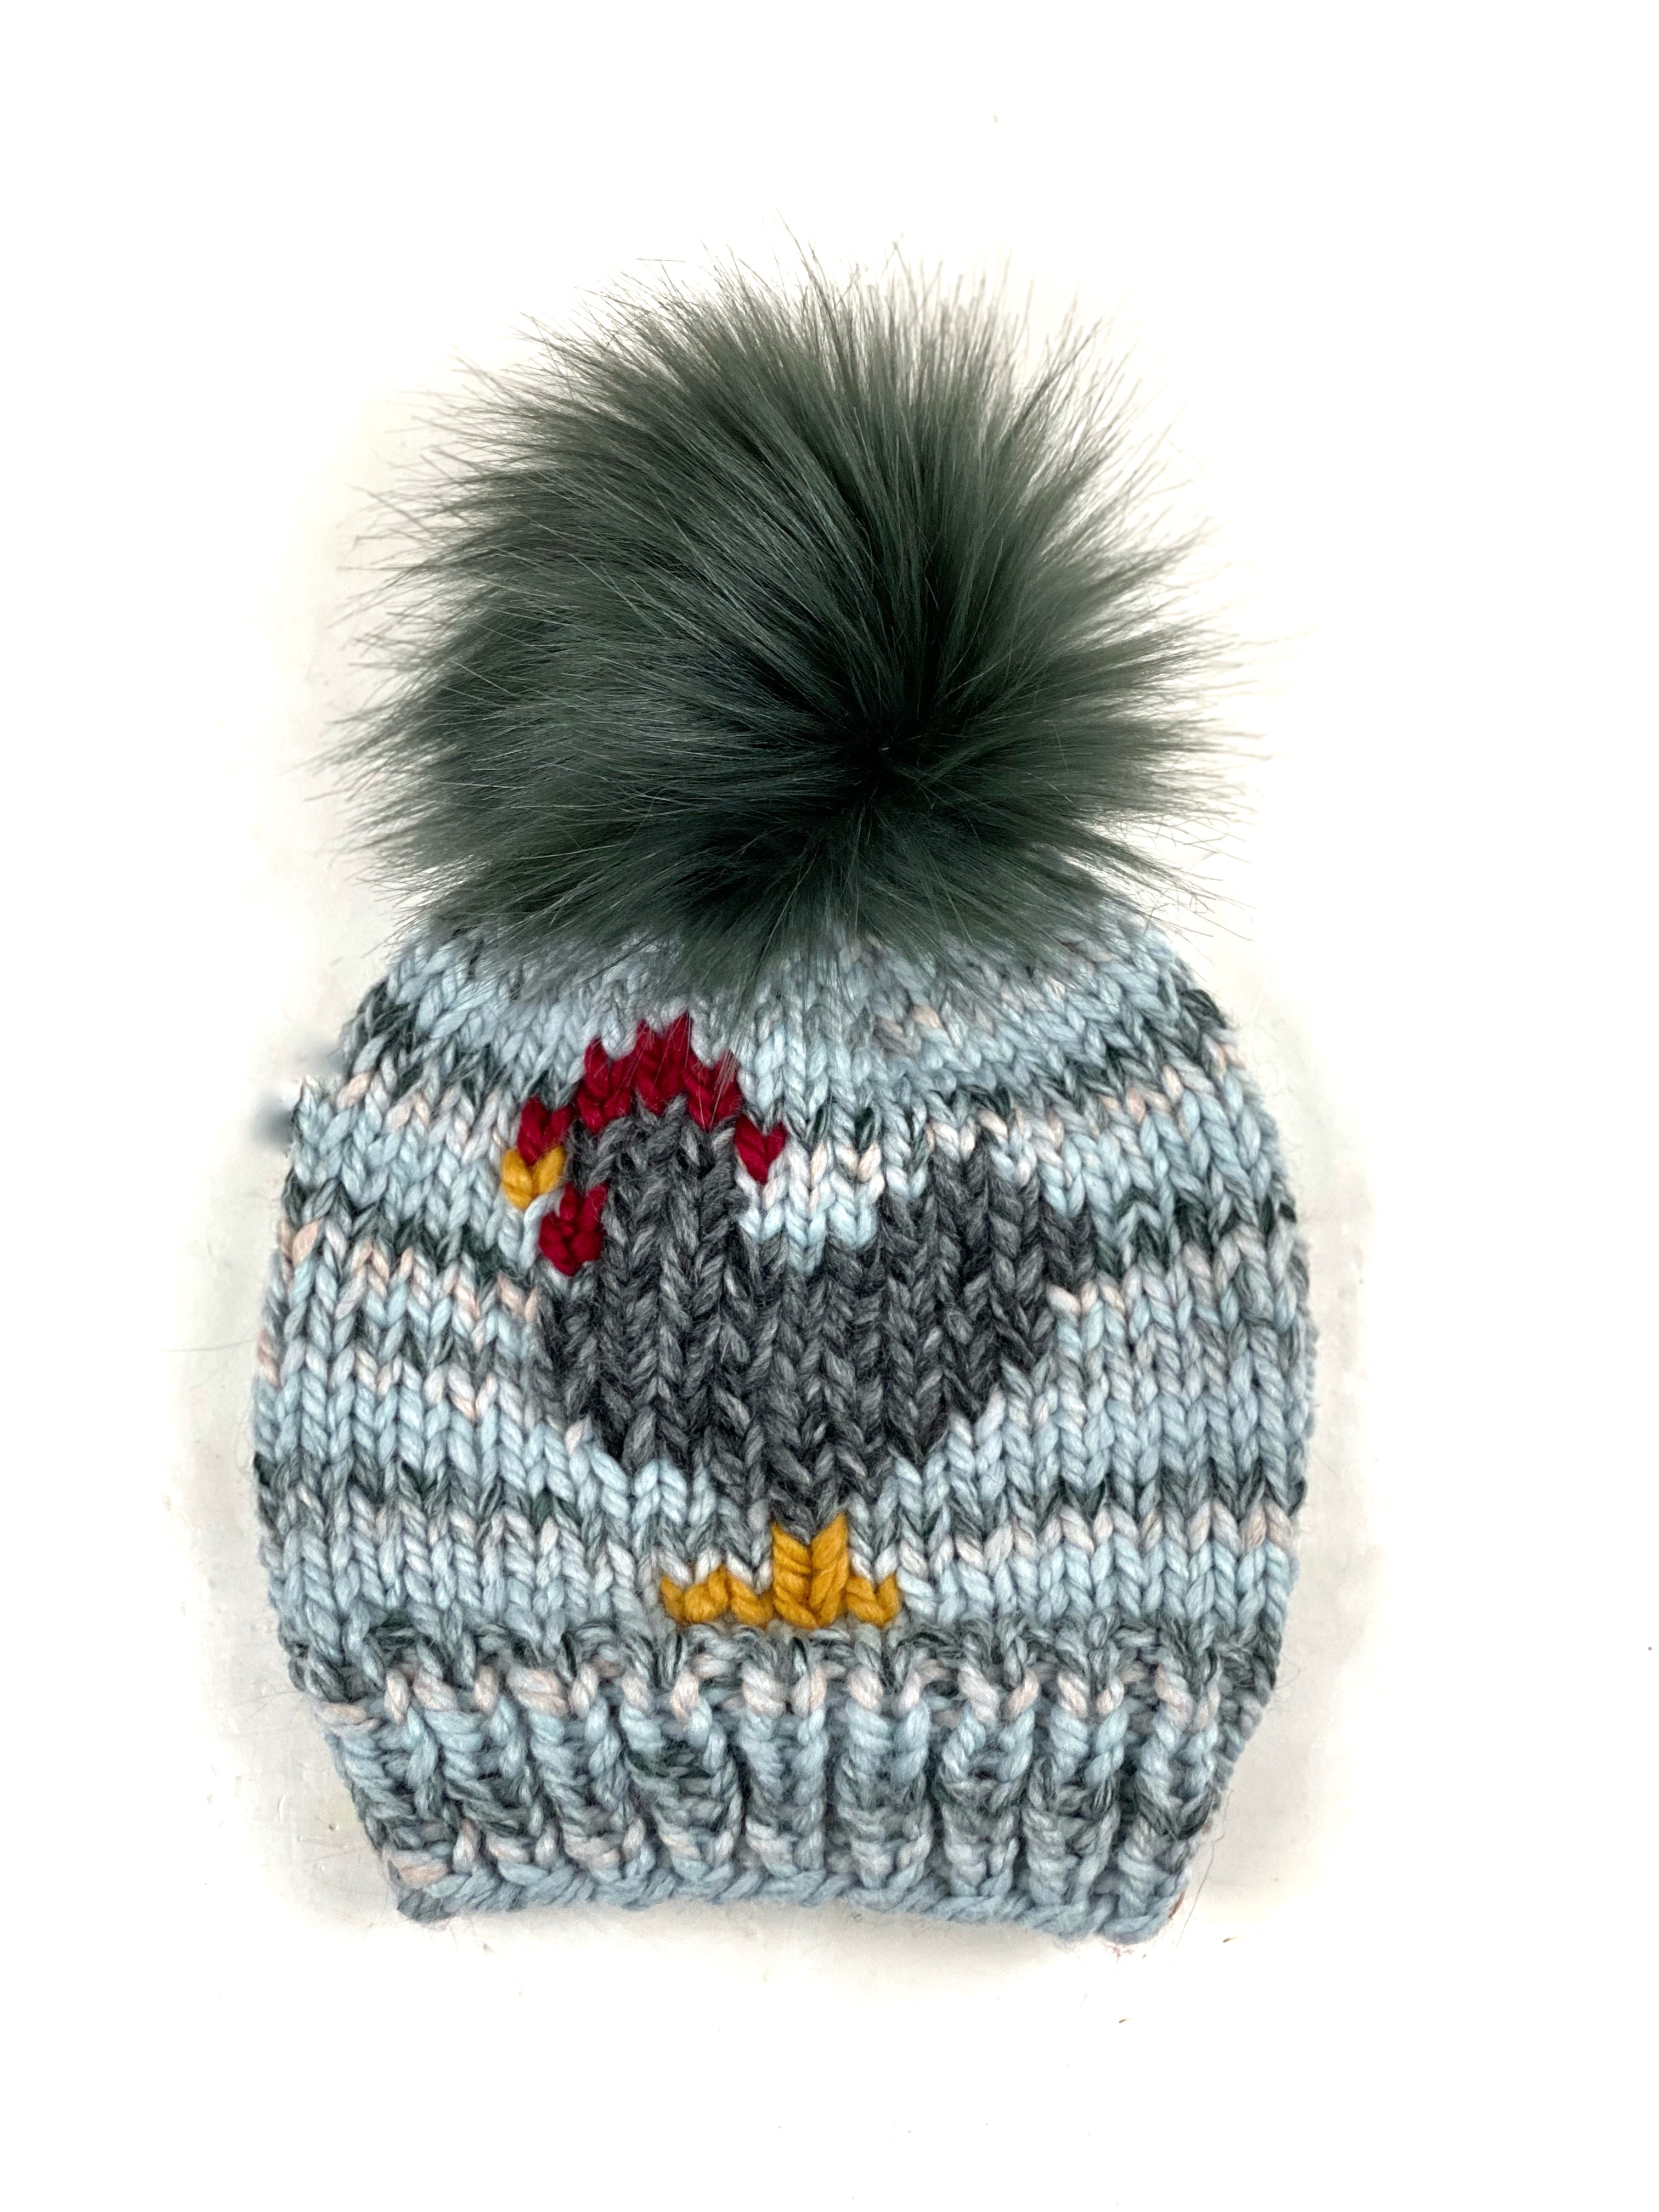 Chicken Hat in Arctic Ice Beanie Wool Blend Womens Adult Hat Faux Fur Pom RTS